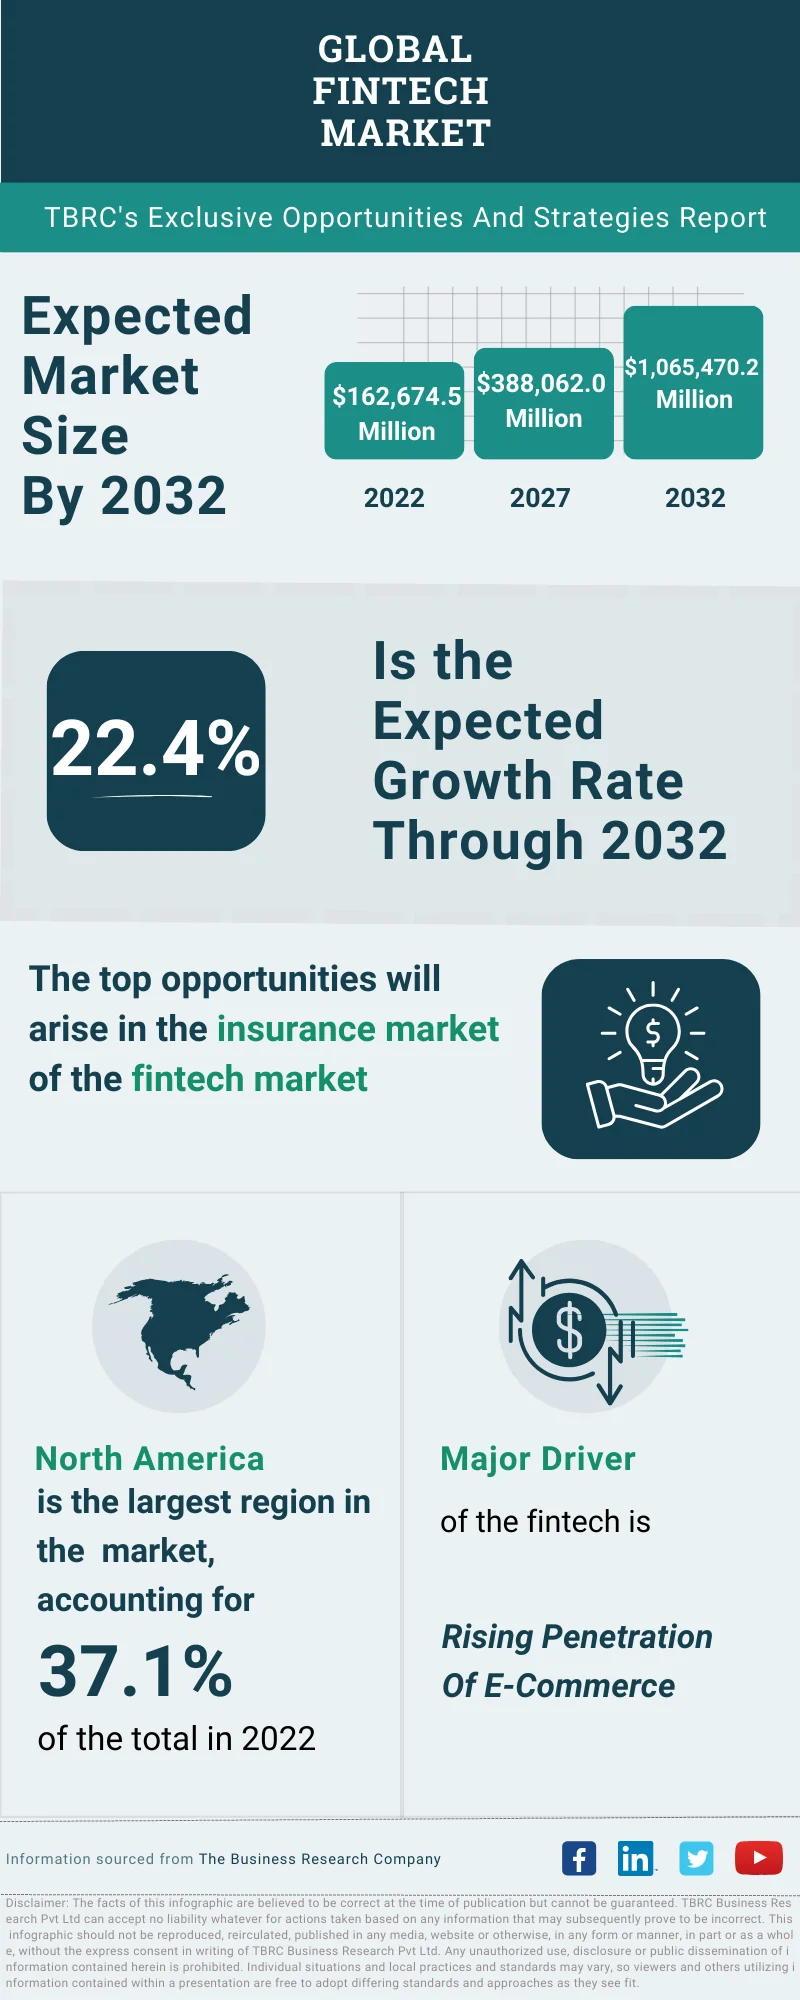 Fintech Global Market Opportunities And Strategies To 2032